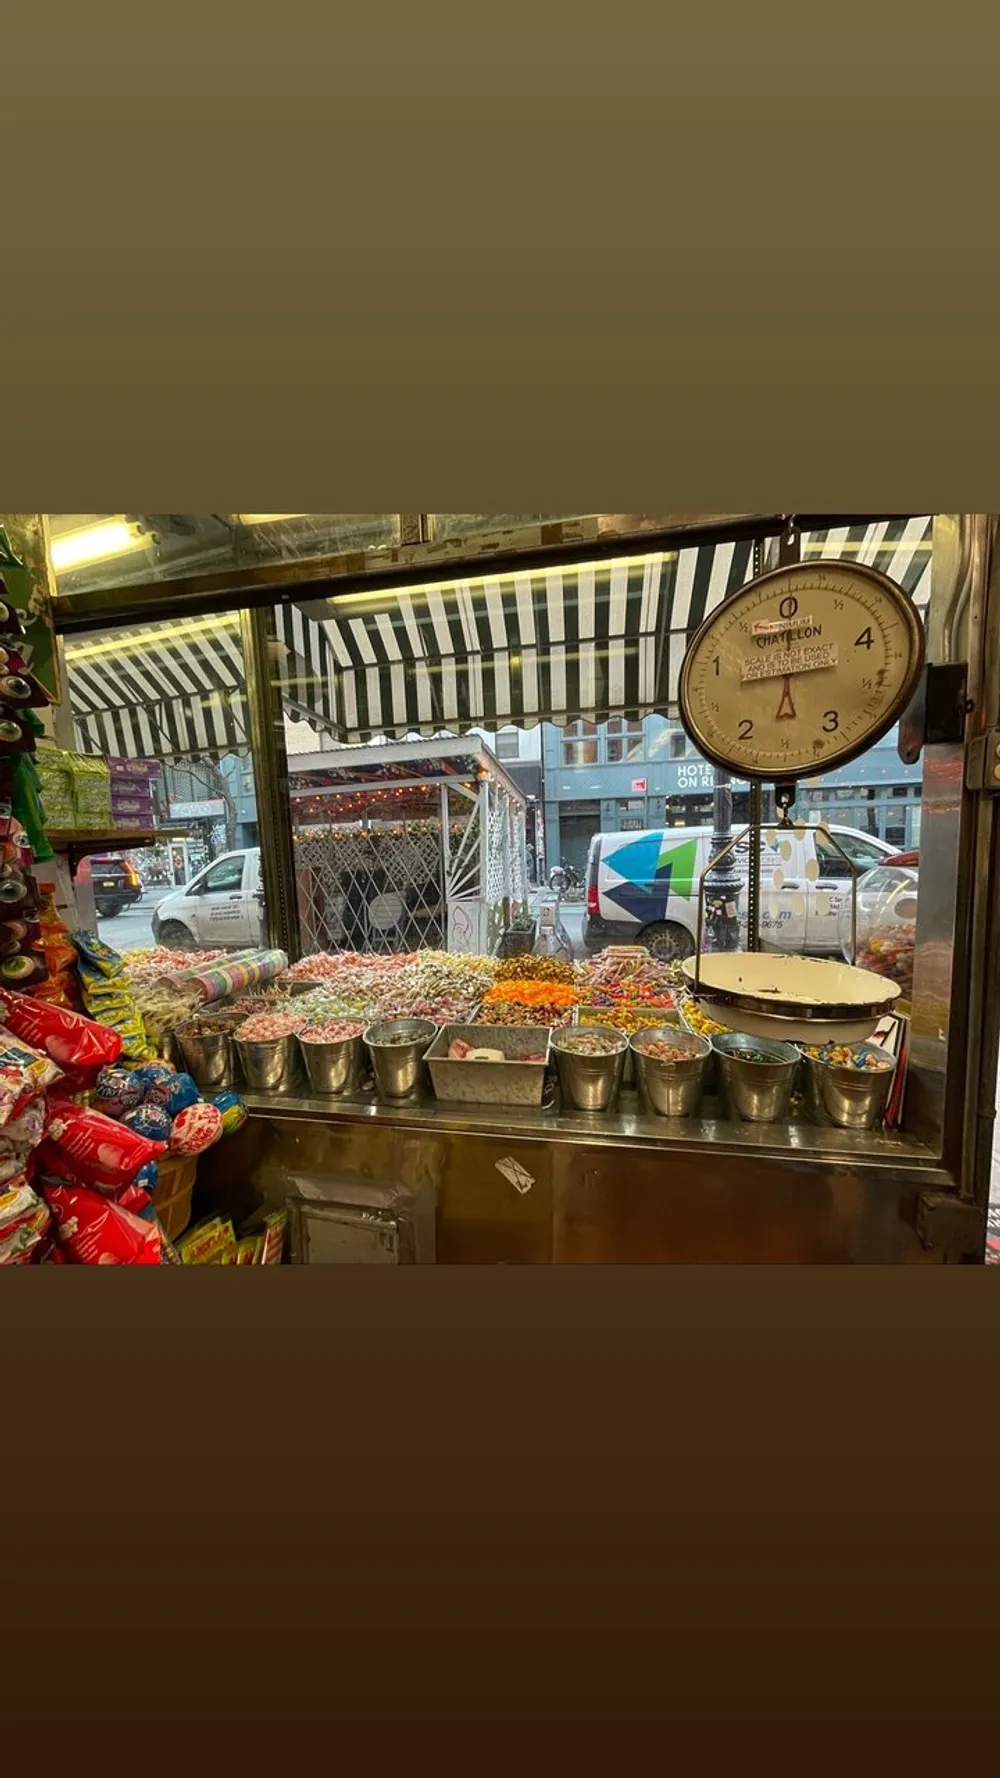 A street vendors stall displays a colorful array of sweets and snacks under the glow of artificial lighting with a bustling city backdrop seen through the service window